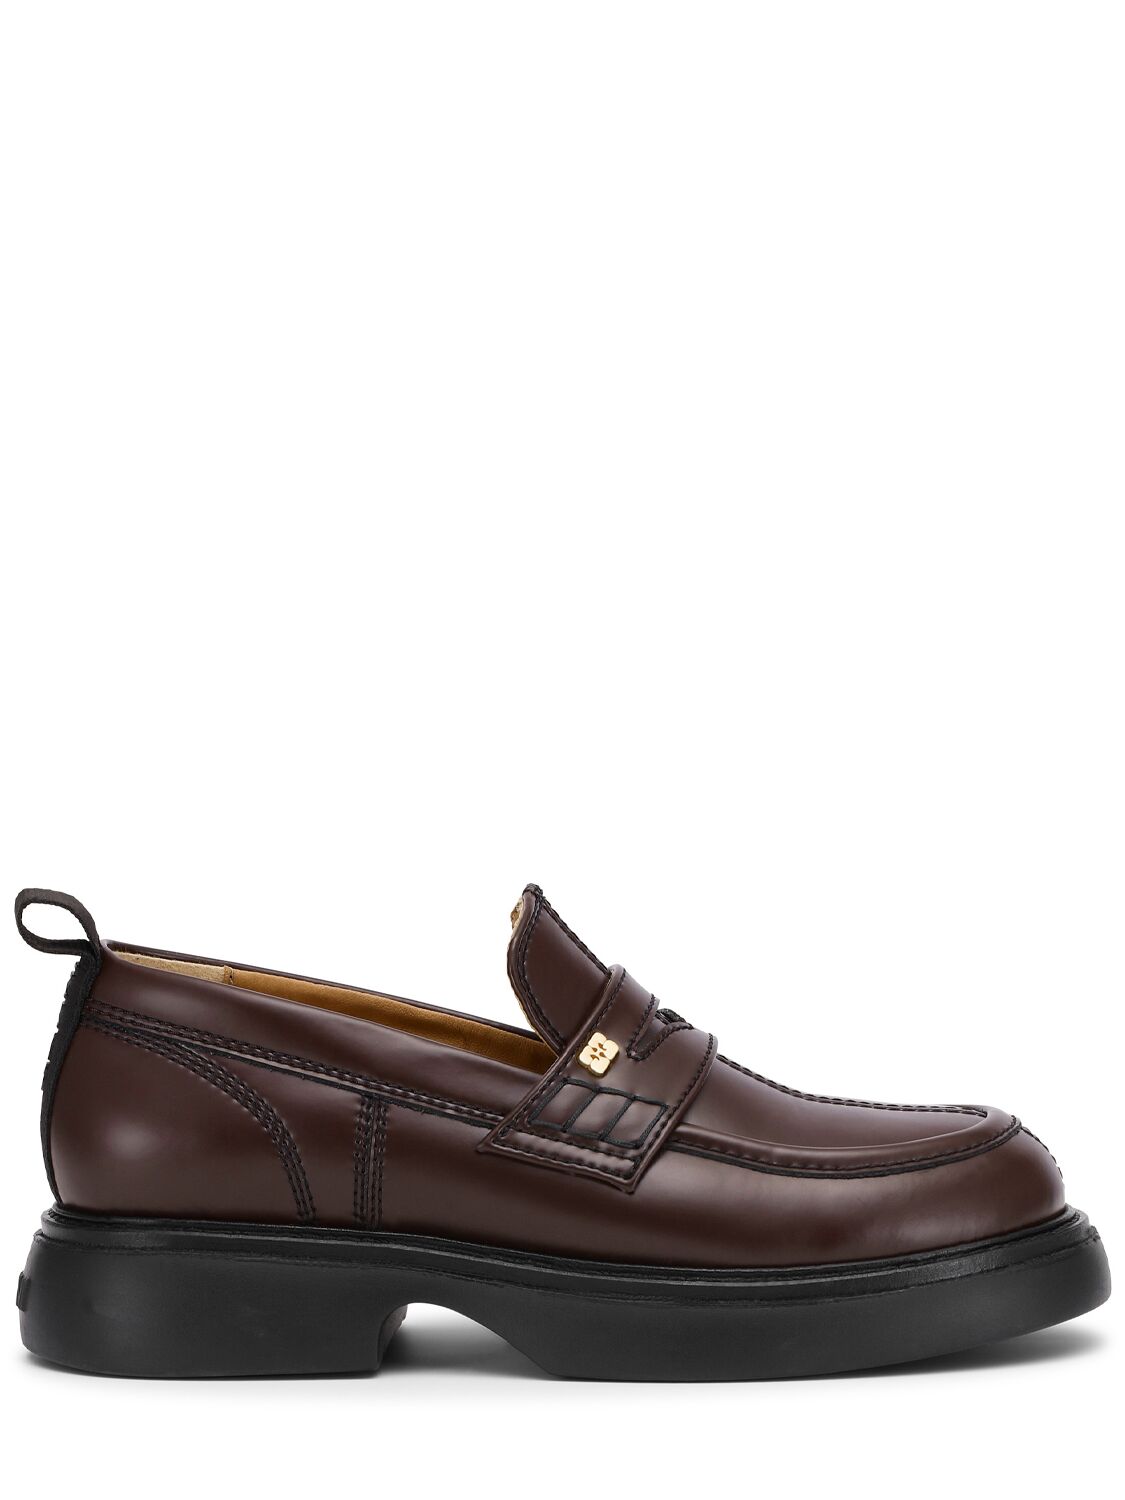 Ganni 25mm Everyday Faux Leather Loafers In Chocolate